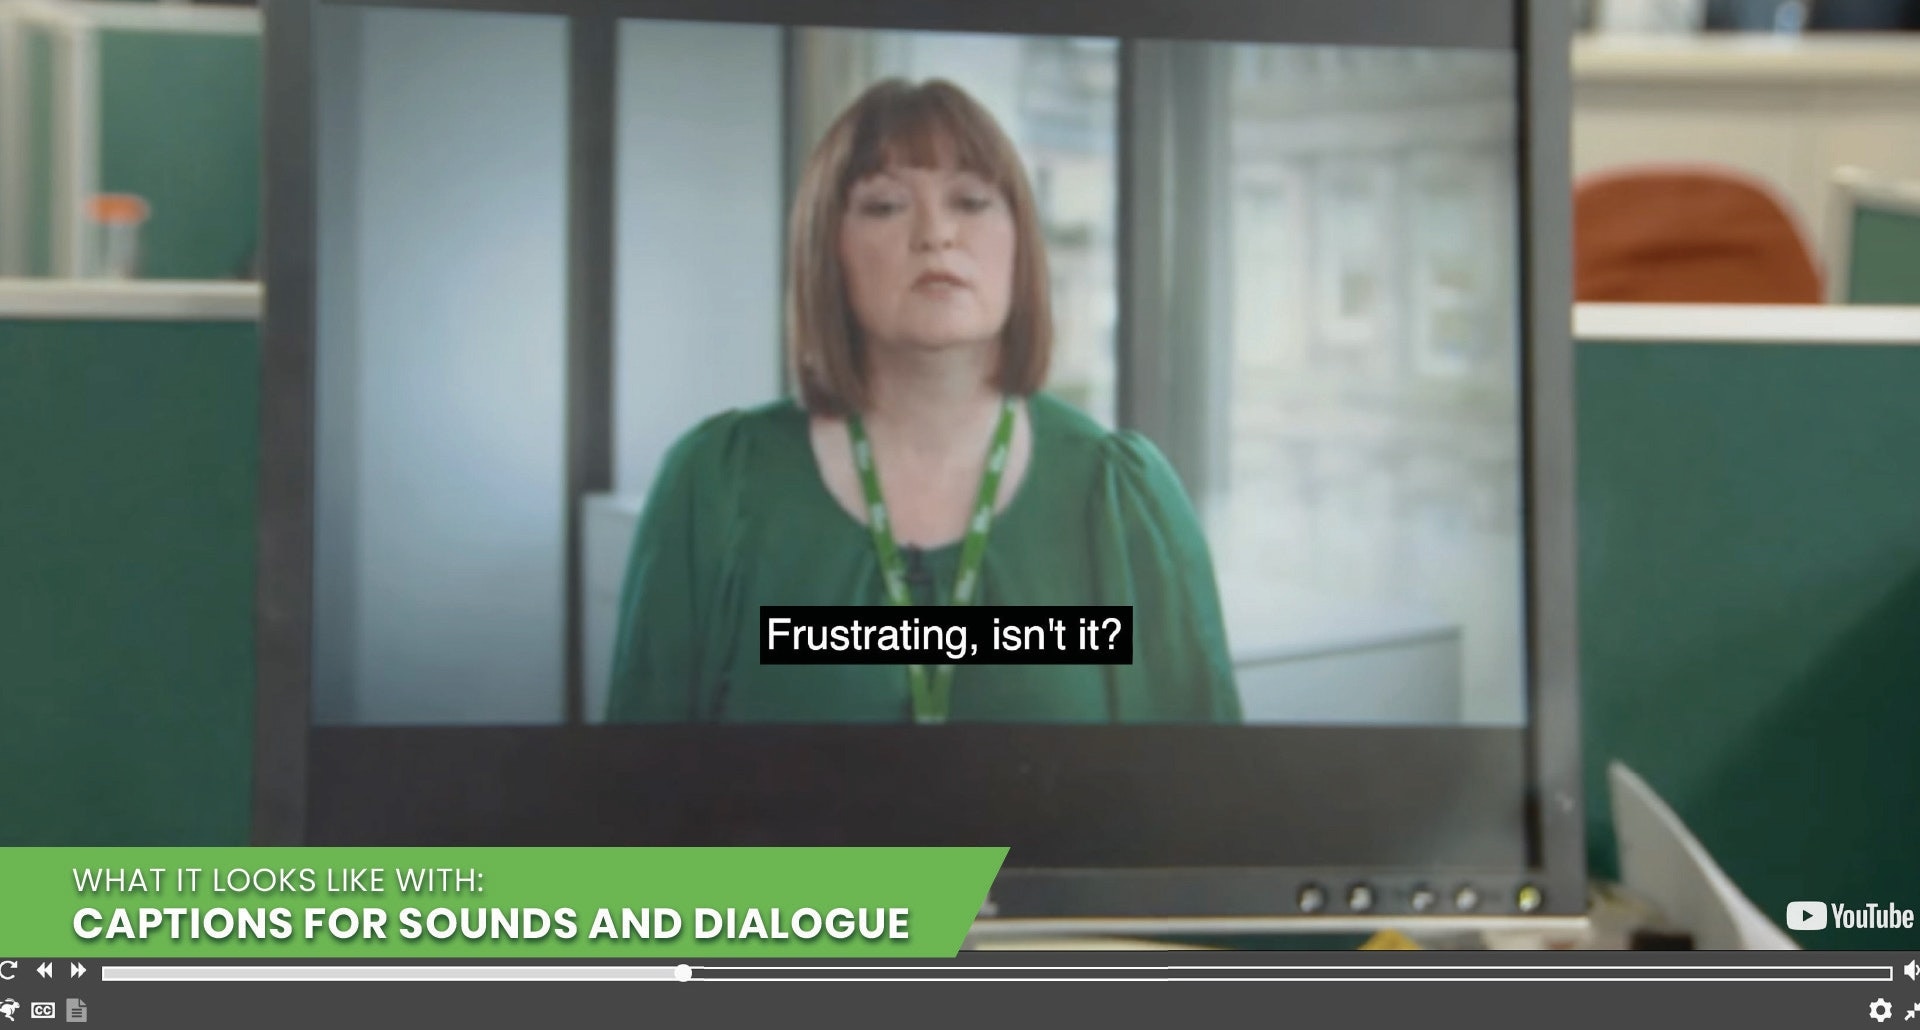 Image of a video playing on a computer with captions for dialogue and sound turned on.